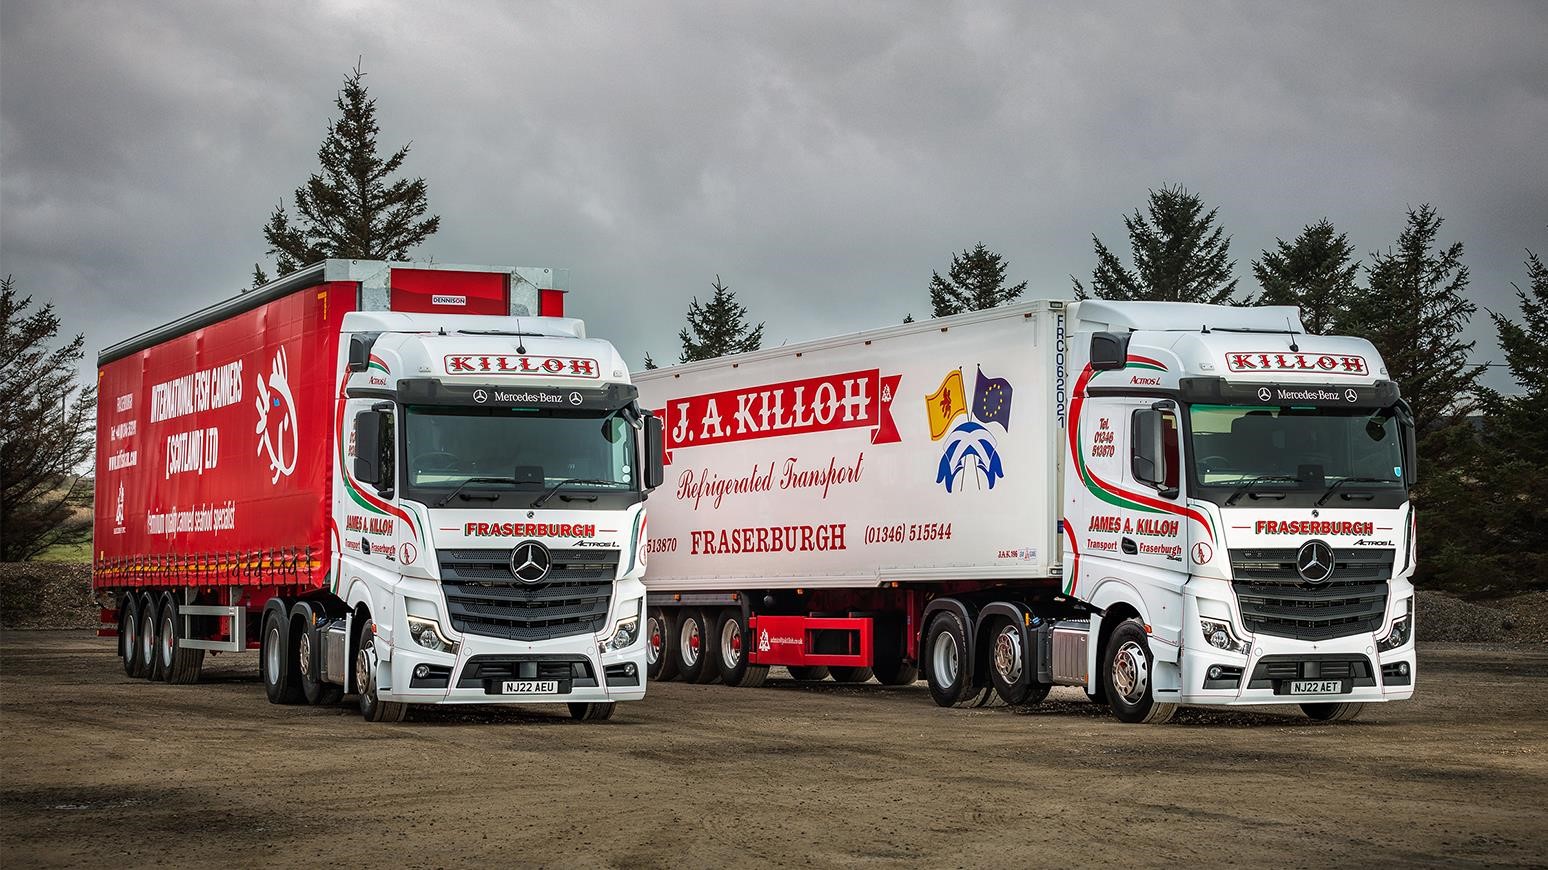 JA Killoh Adds Mercedes-Benz Actros L Trucks For Nationwide Seafood Distribution